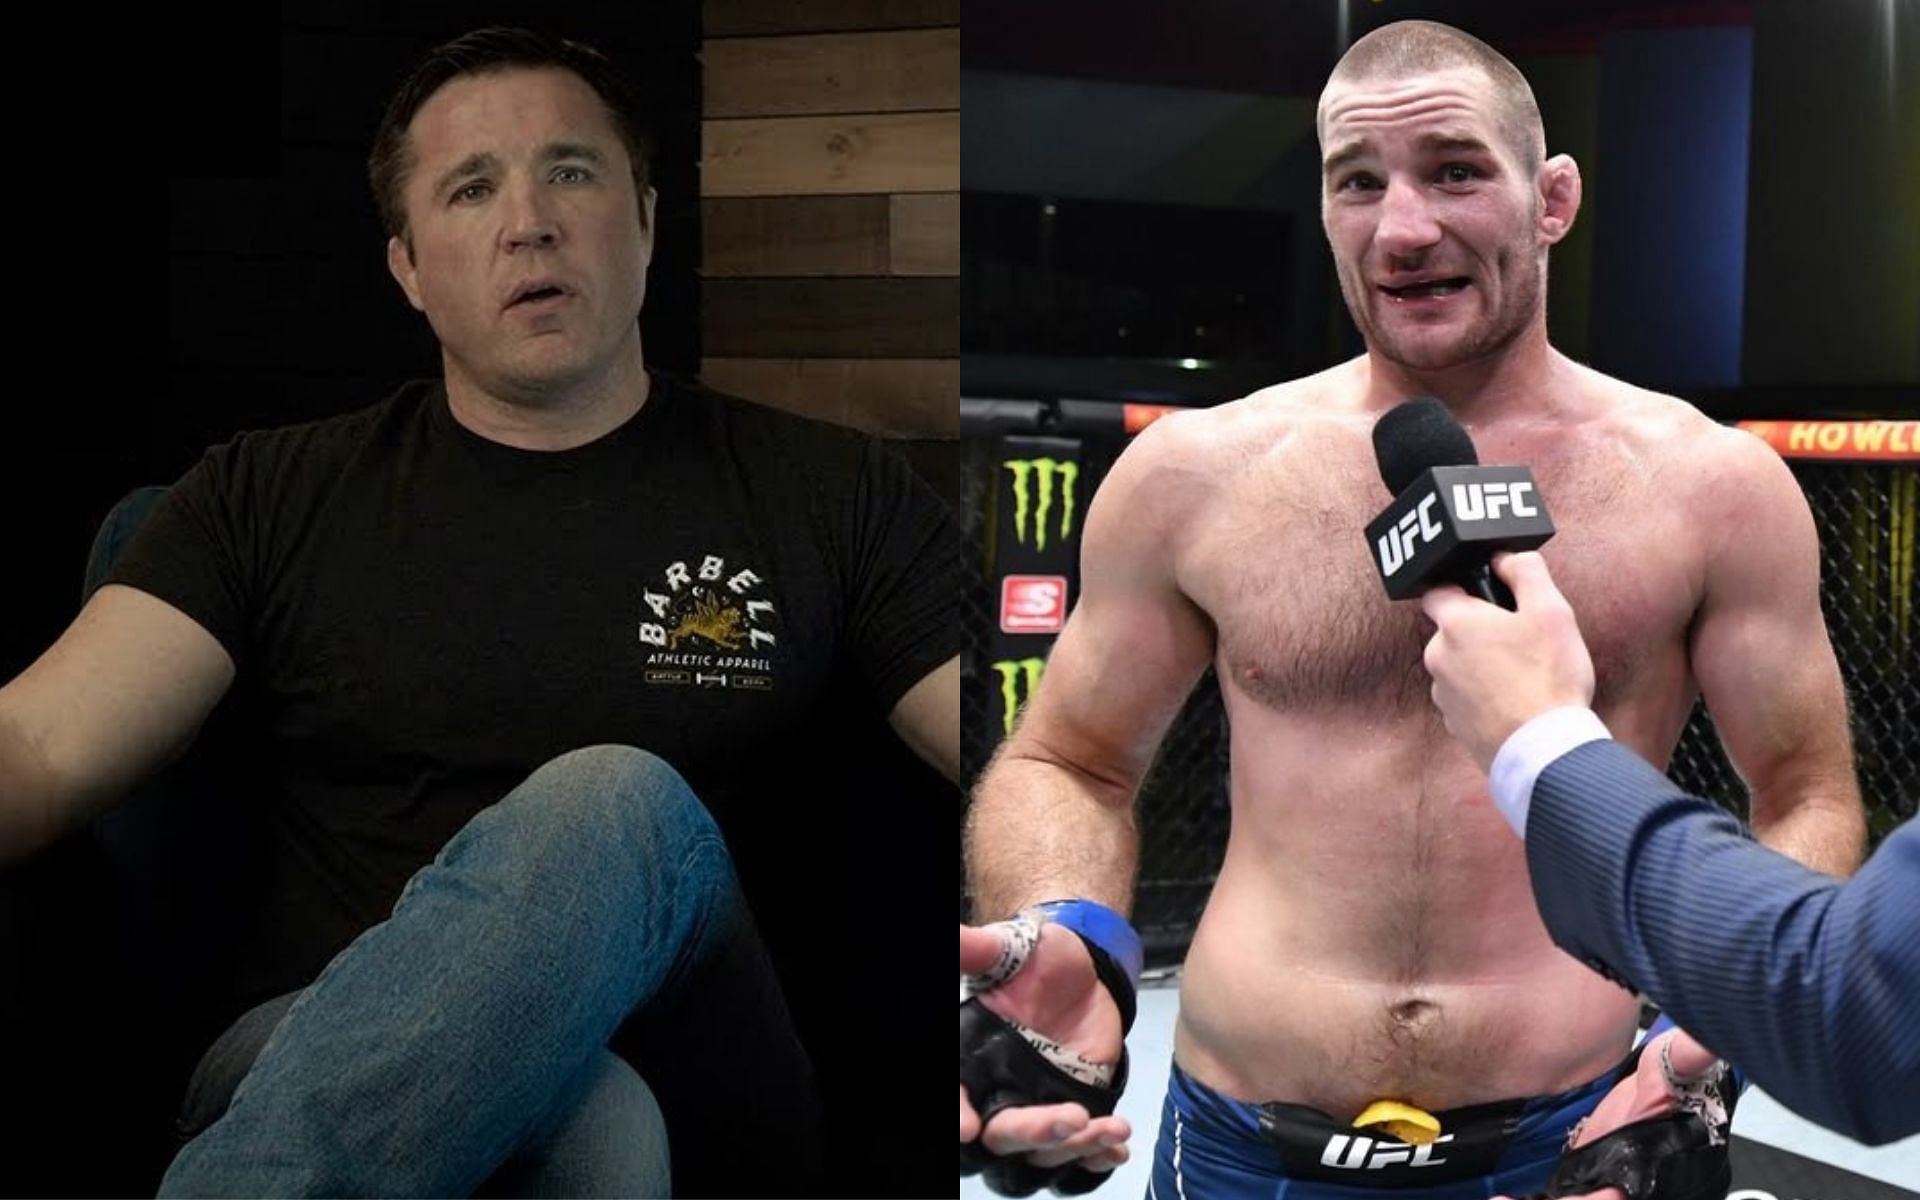 Chael Sonnen (left) and Sean Strickland (right) [Photo credit: YouTube.com]